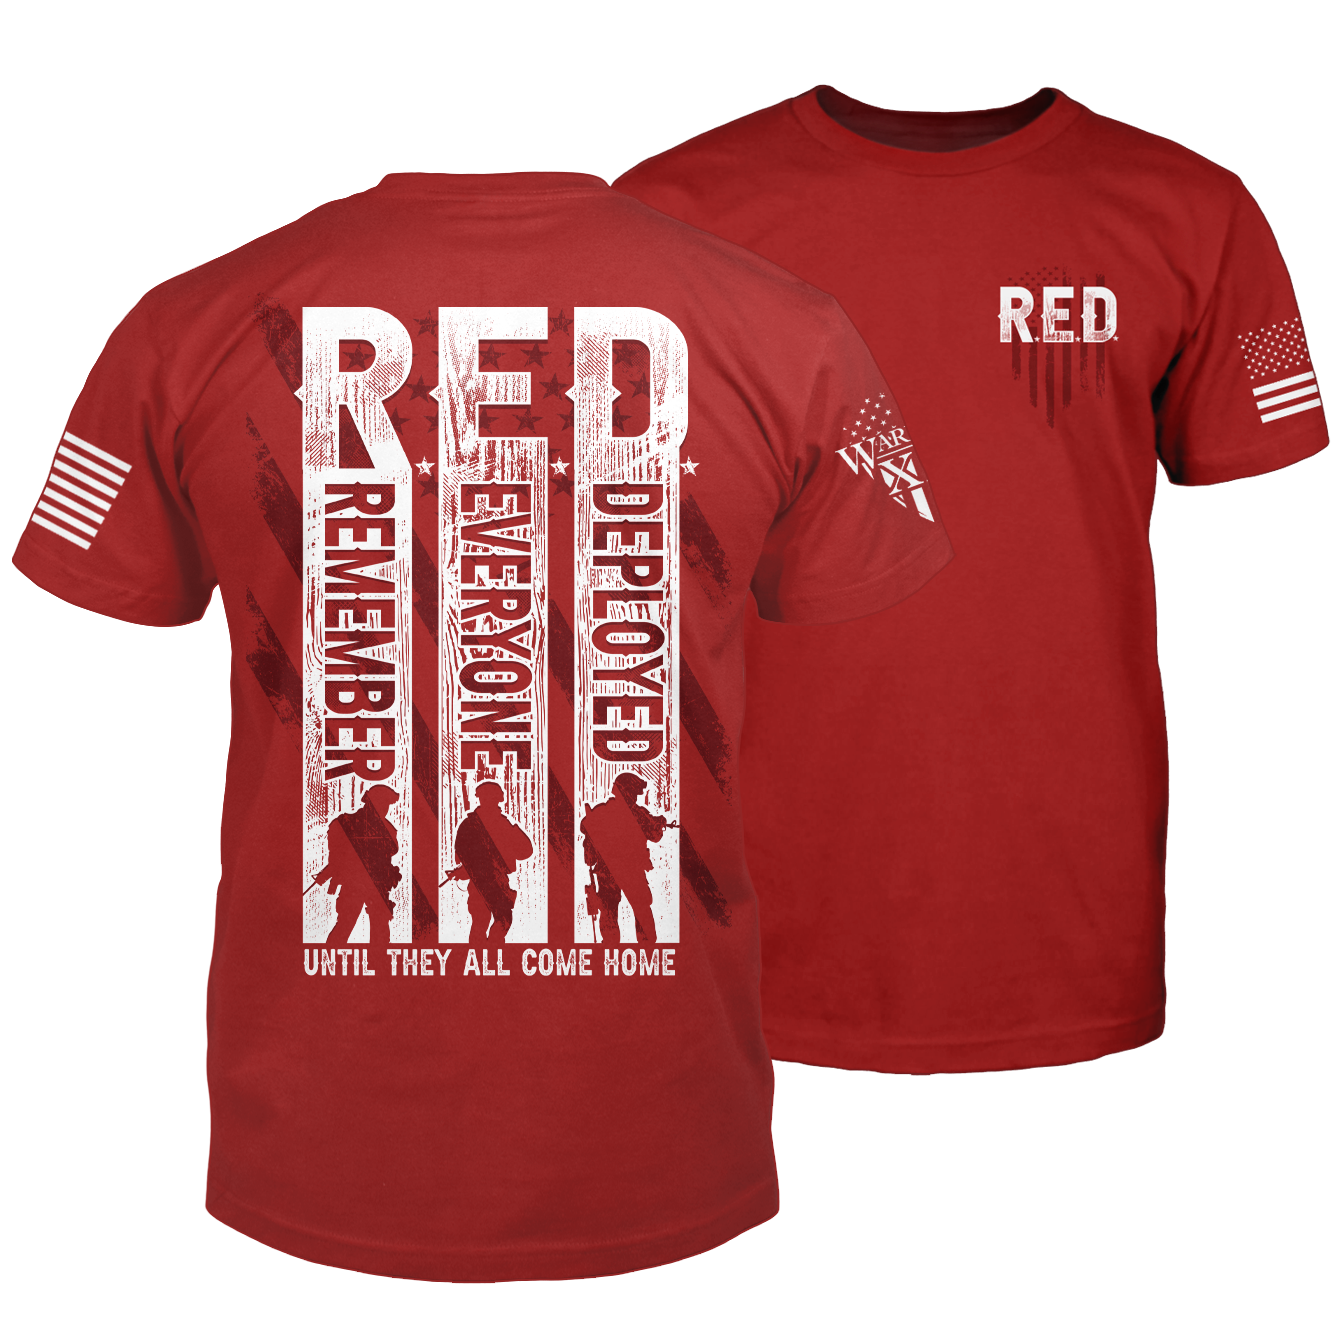 The front and back of a red t-shirt which has an image on the back with silhouettes of solders with the words "Remember Everyone Deployed, until they call come home." The front features a small pocket image which says R.E.D. in front of an American flag.